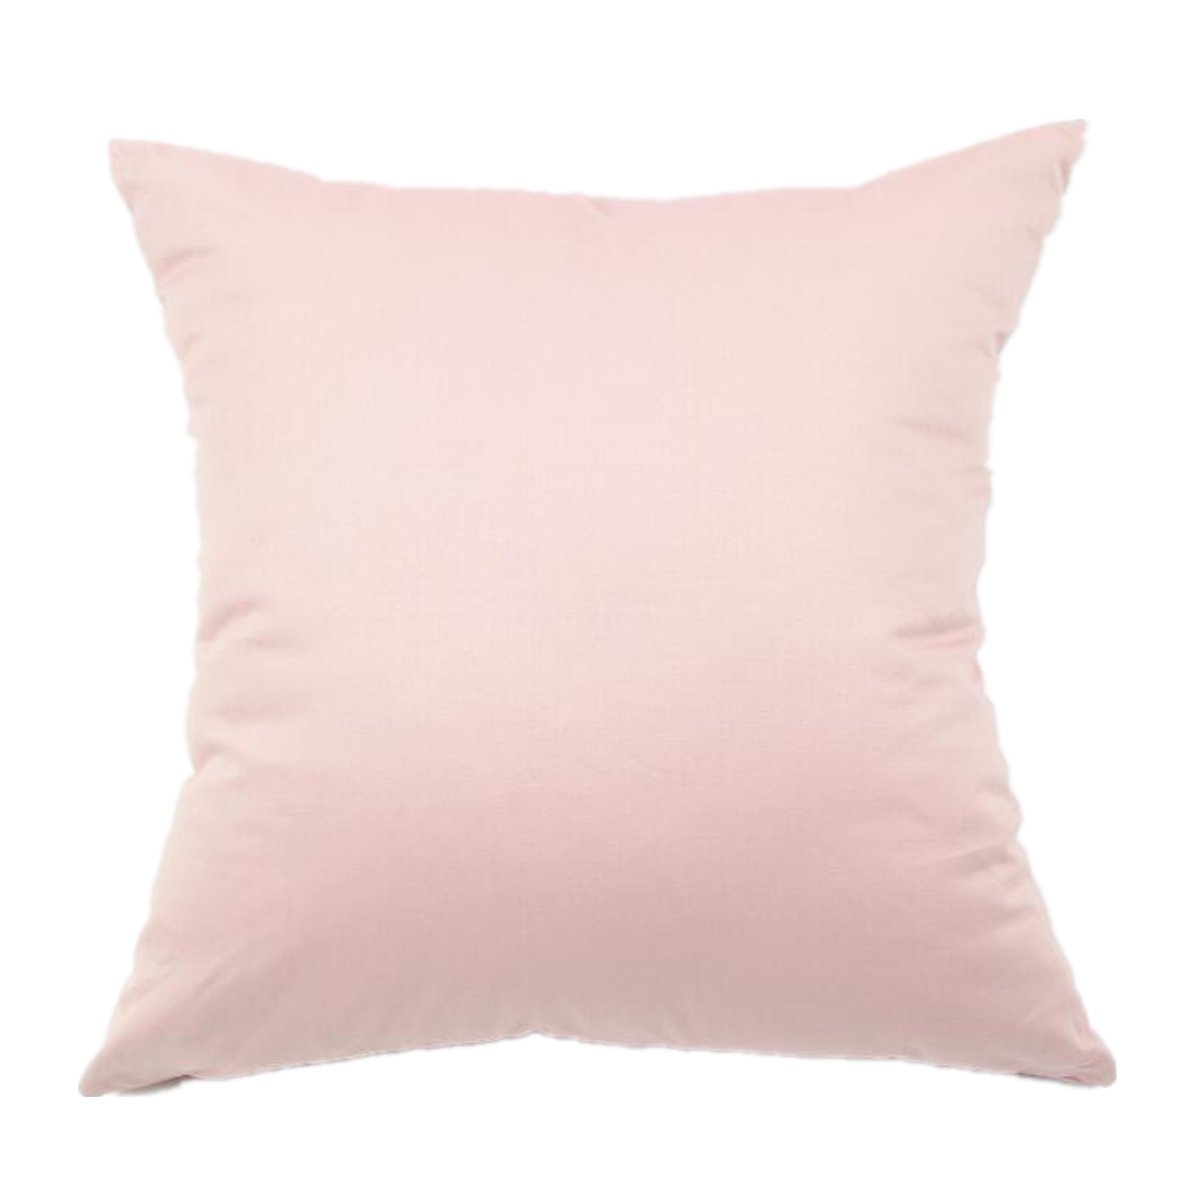 Cotton-Pillow-Case-Solid-Color-Cushion-Cover-Throw-Home-Sofa-Decoration-45X45cm-1579144-9